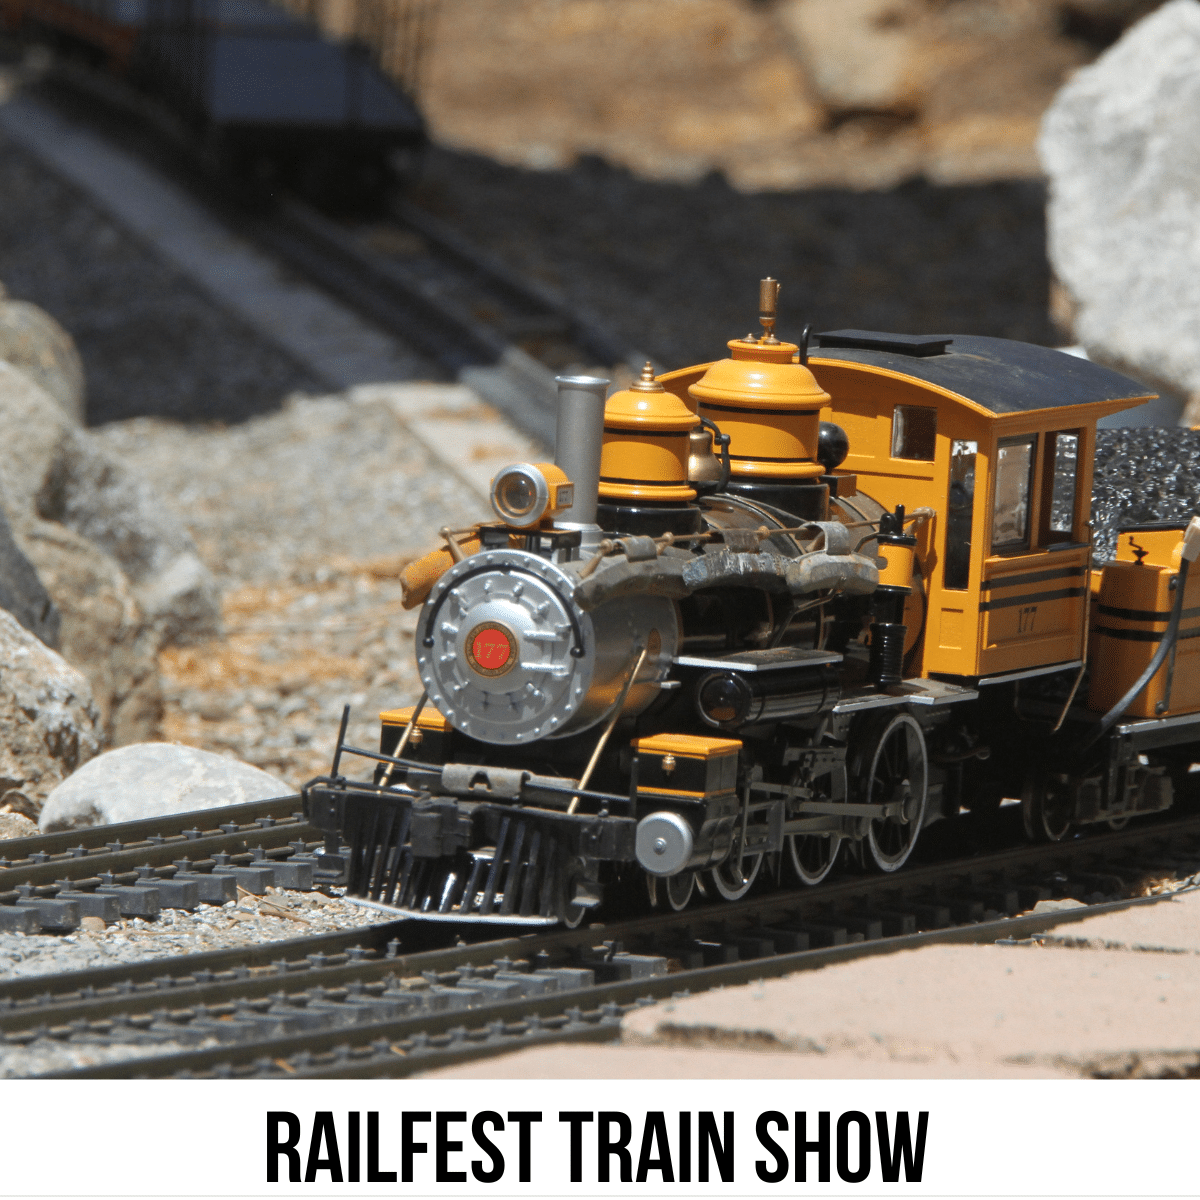 A square image of a photo of a yellow train on a train track. A white strip across the bottom has text Railfest Train Show.